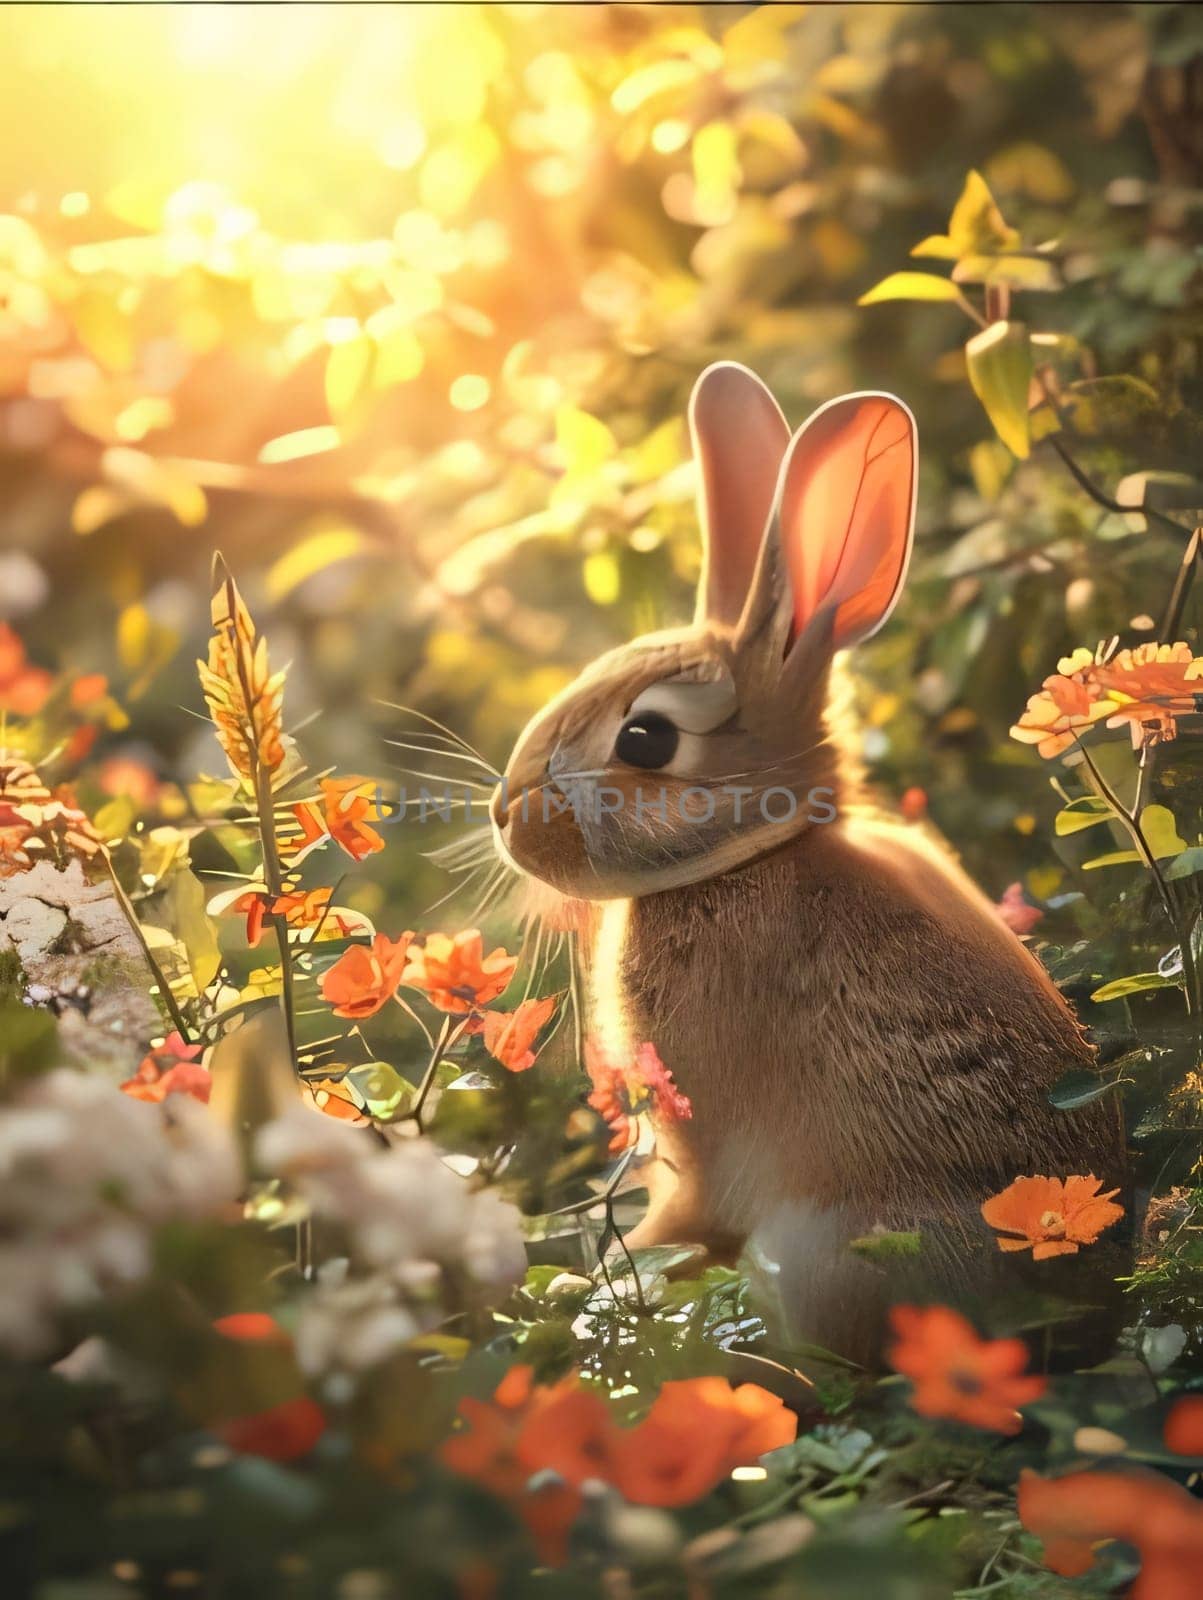 Tiny bunny around colorful flowers and sunshine. Flowering flowers, a symbol of spring, new life. A joyful time of nature waking up to life.